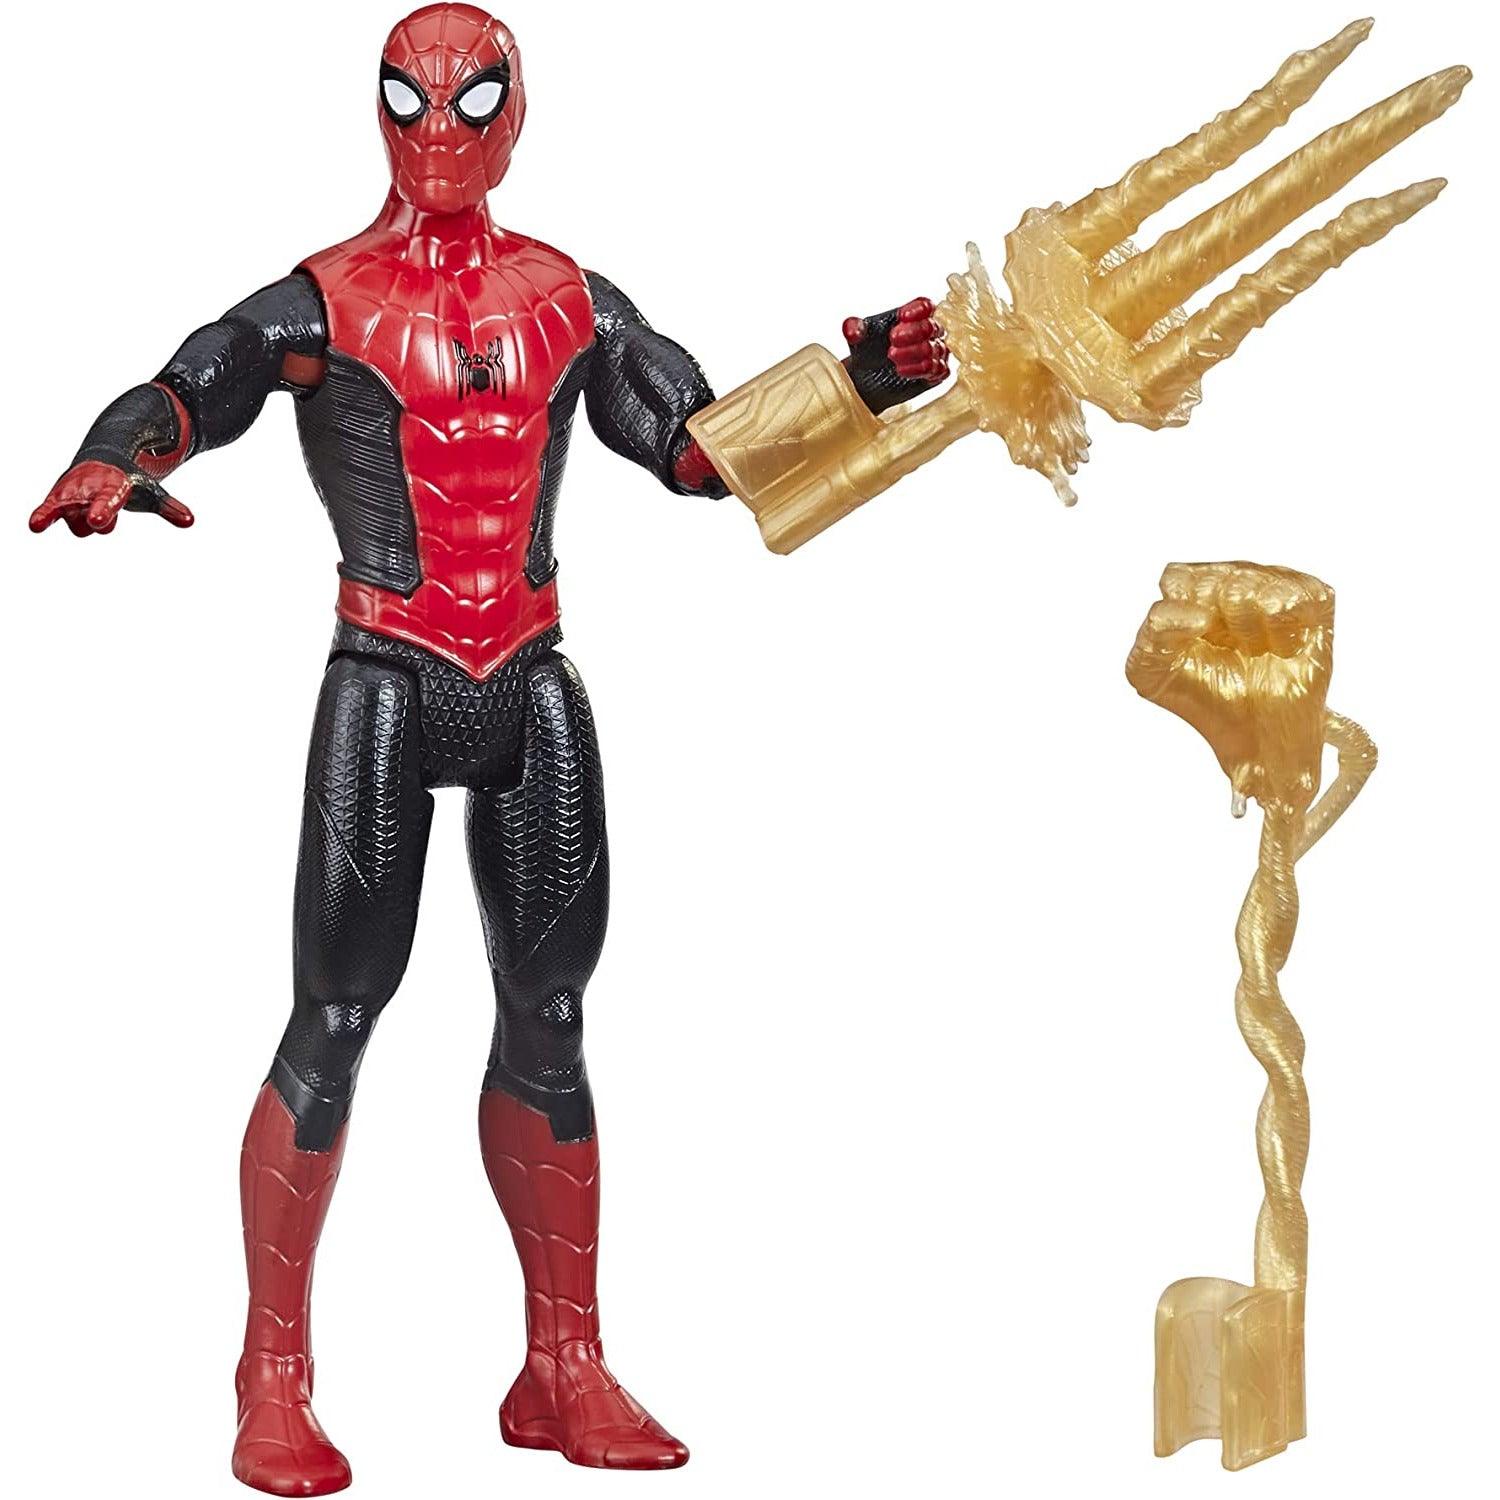 Hasbro Marvel Studios Mystery Web Gear Upgraded Black and Red Suit Action Figure - 6-Inch - BumbleToys - 5-7 Years, Action Figures, Avengers, Boys, Eagle Plus